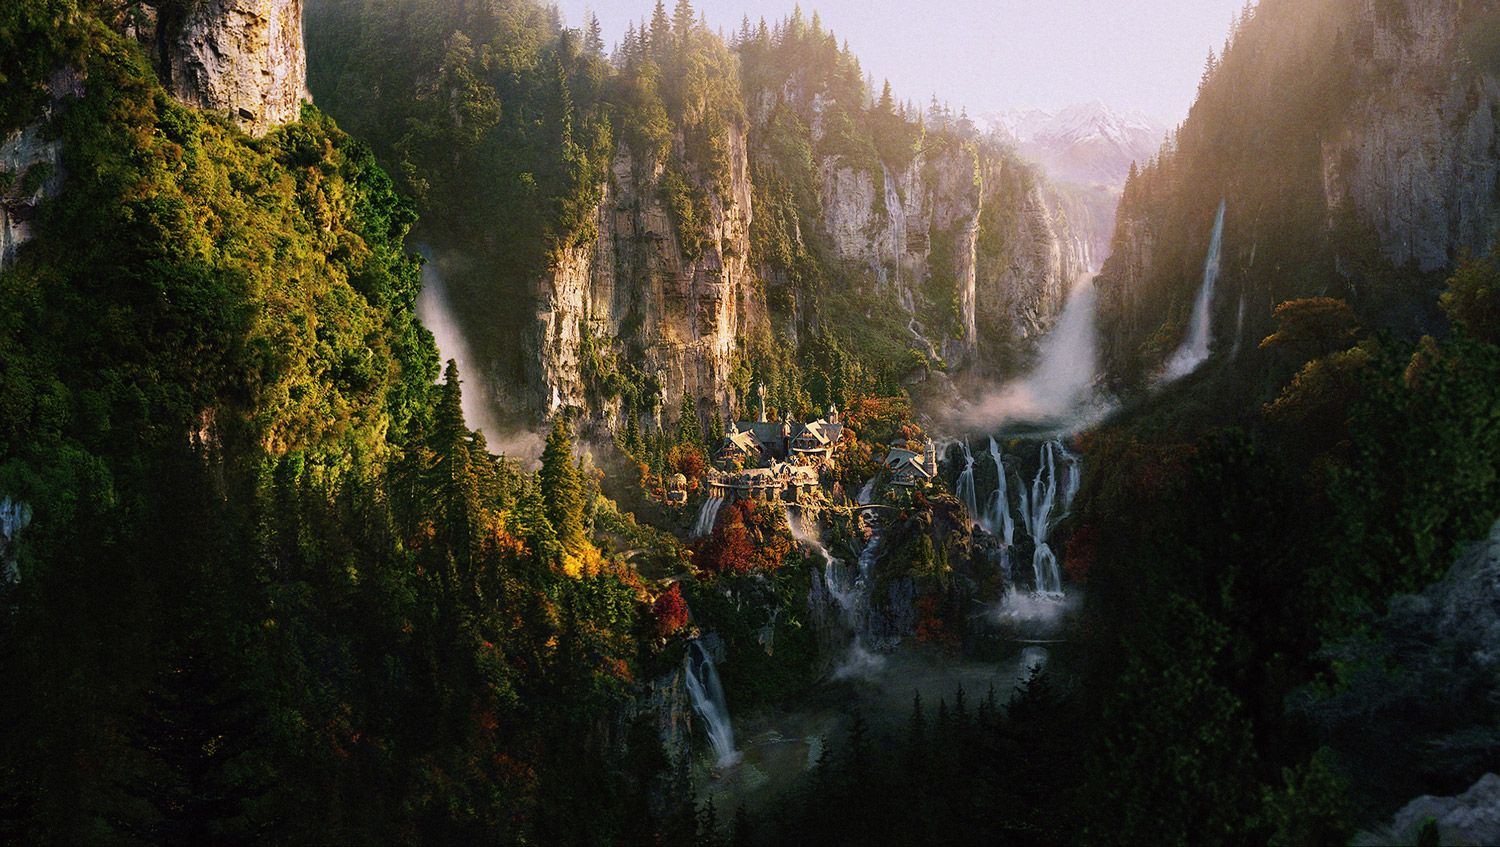 Lord of the Rings Peter Jackson Rivendell Valley Fellowship of the Ring